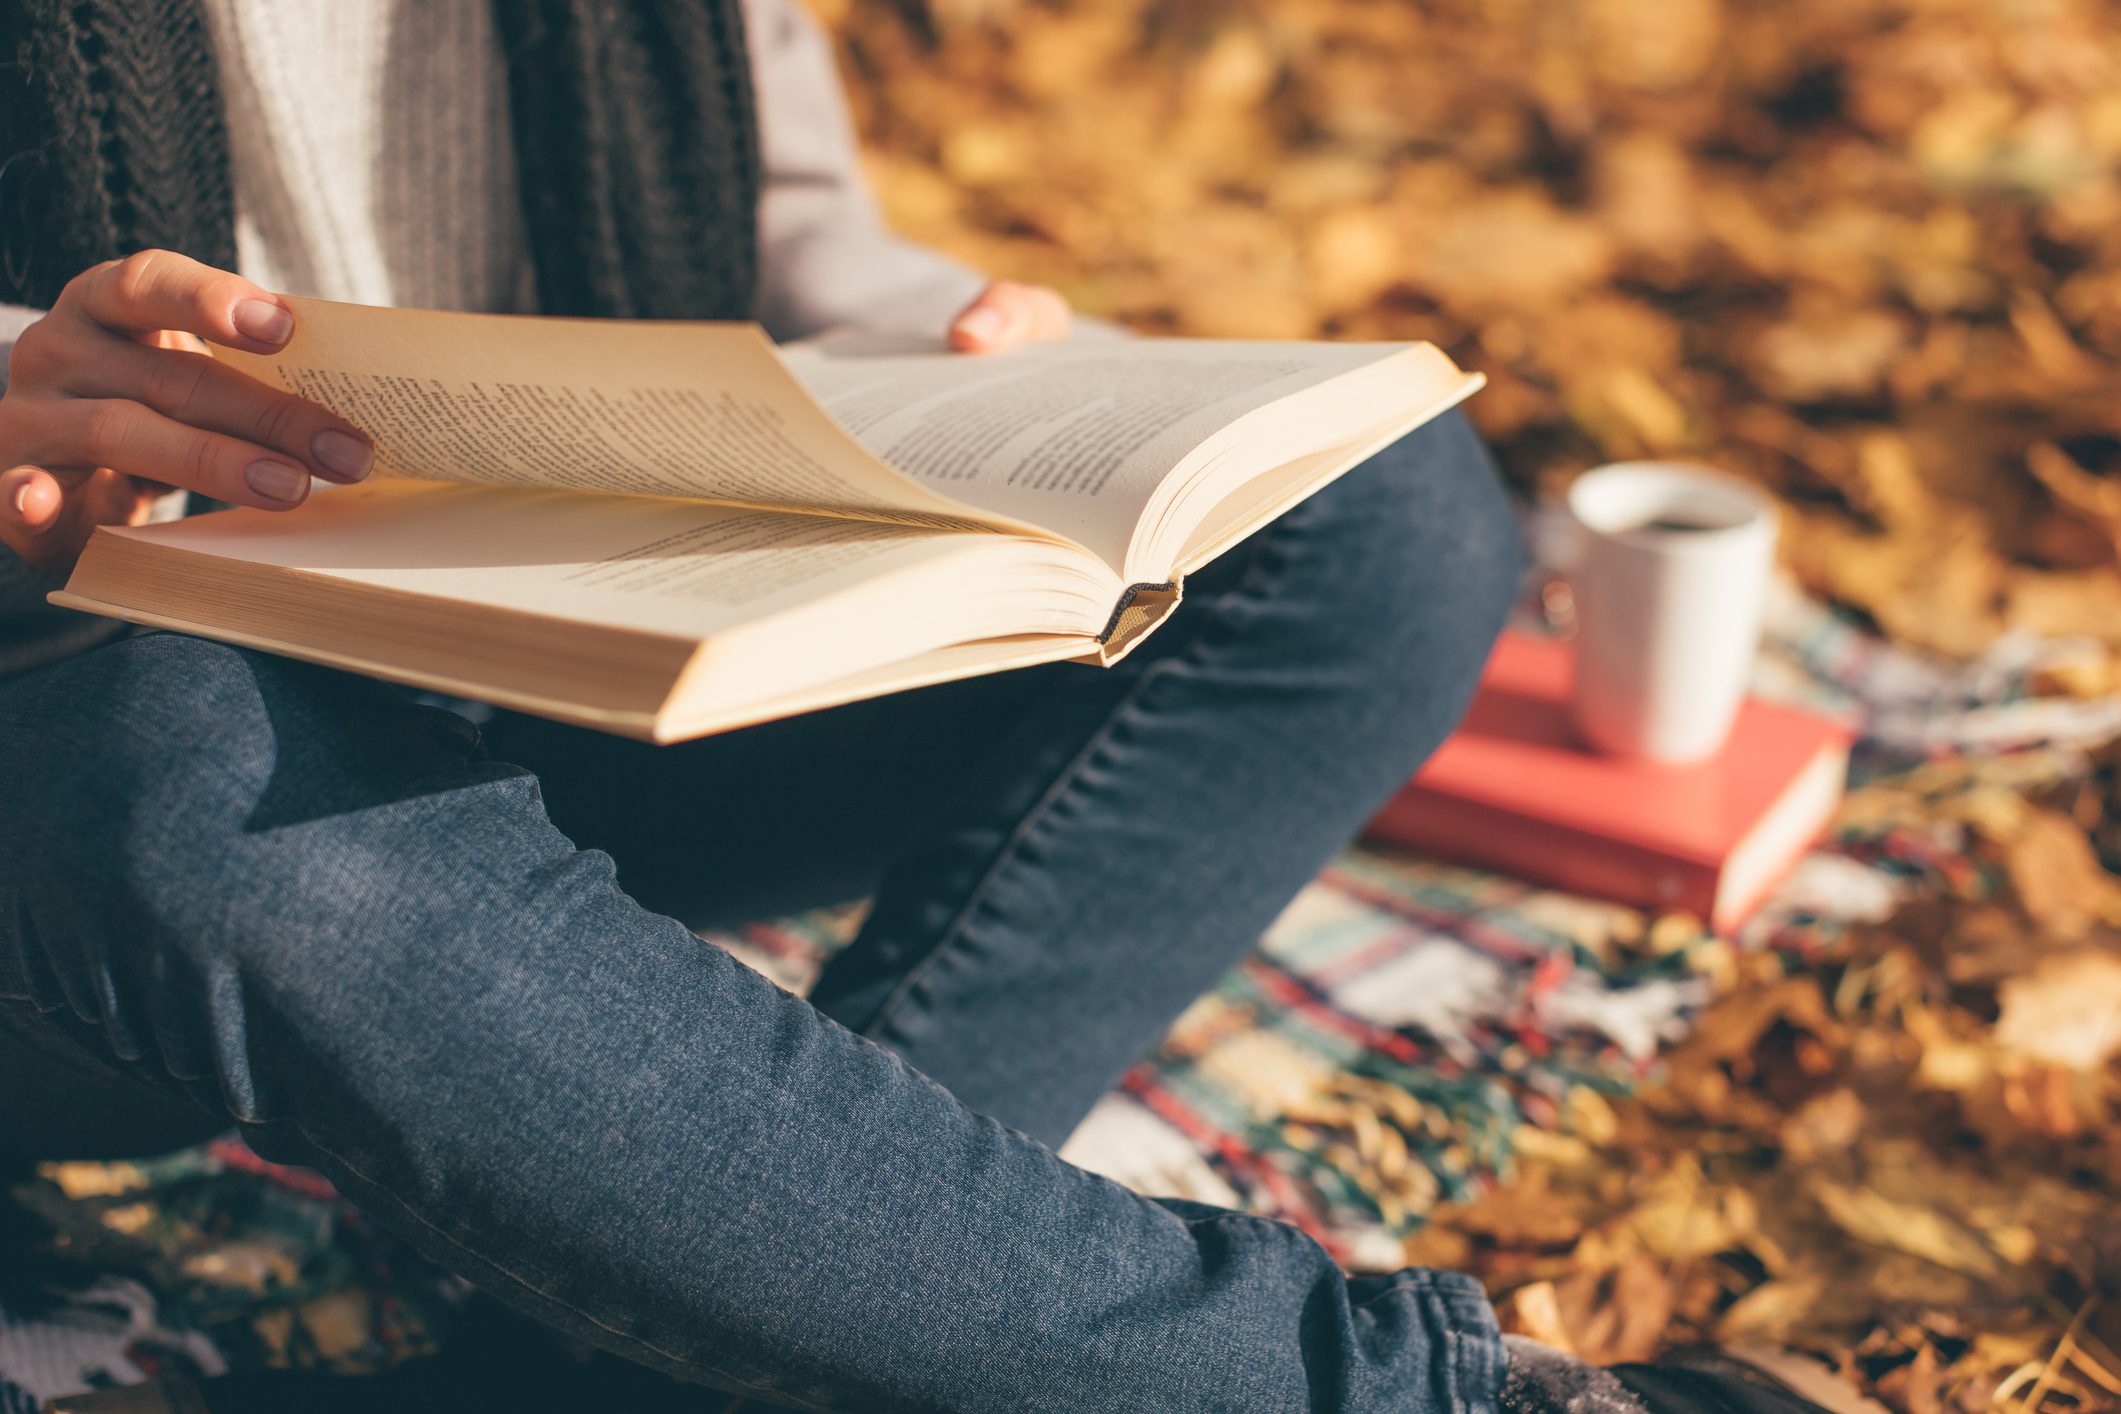 Cropped image of young woman sitting on blanket, reading book and drinking coffee or tea in autumn garden.